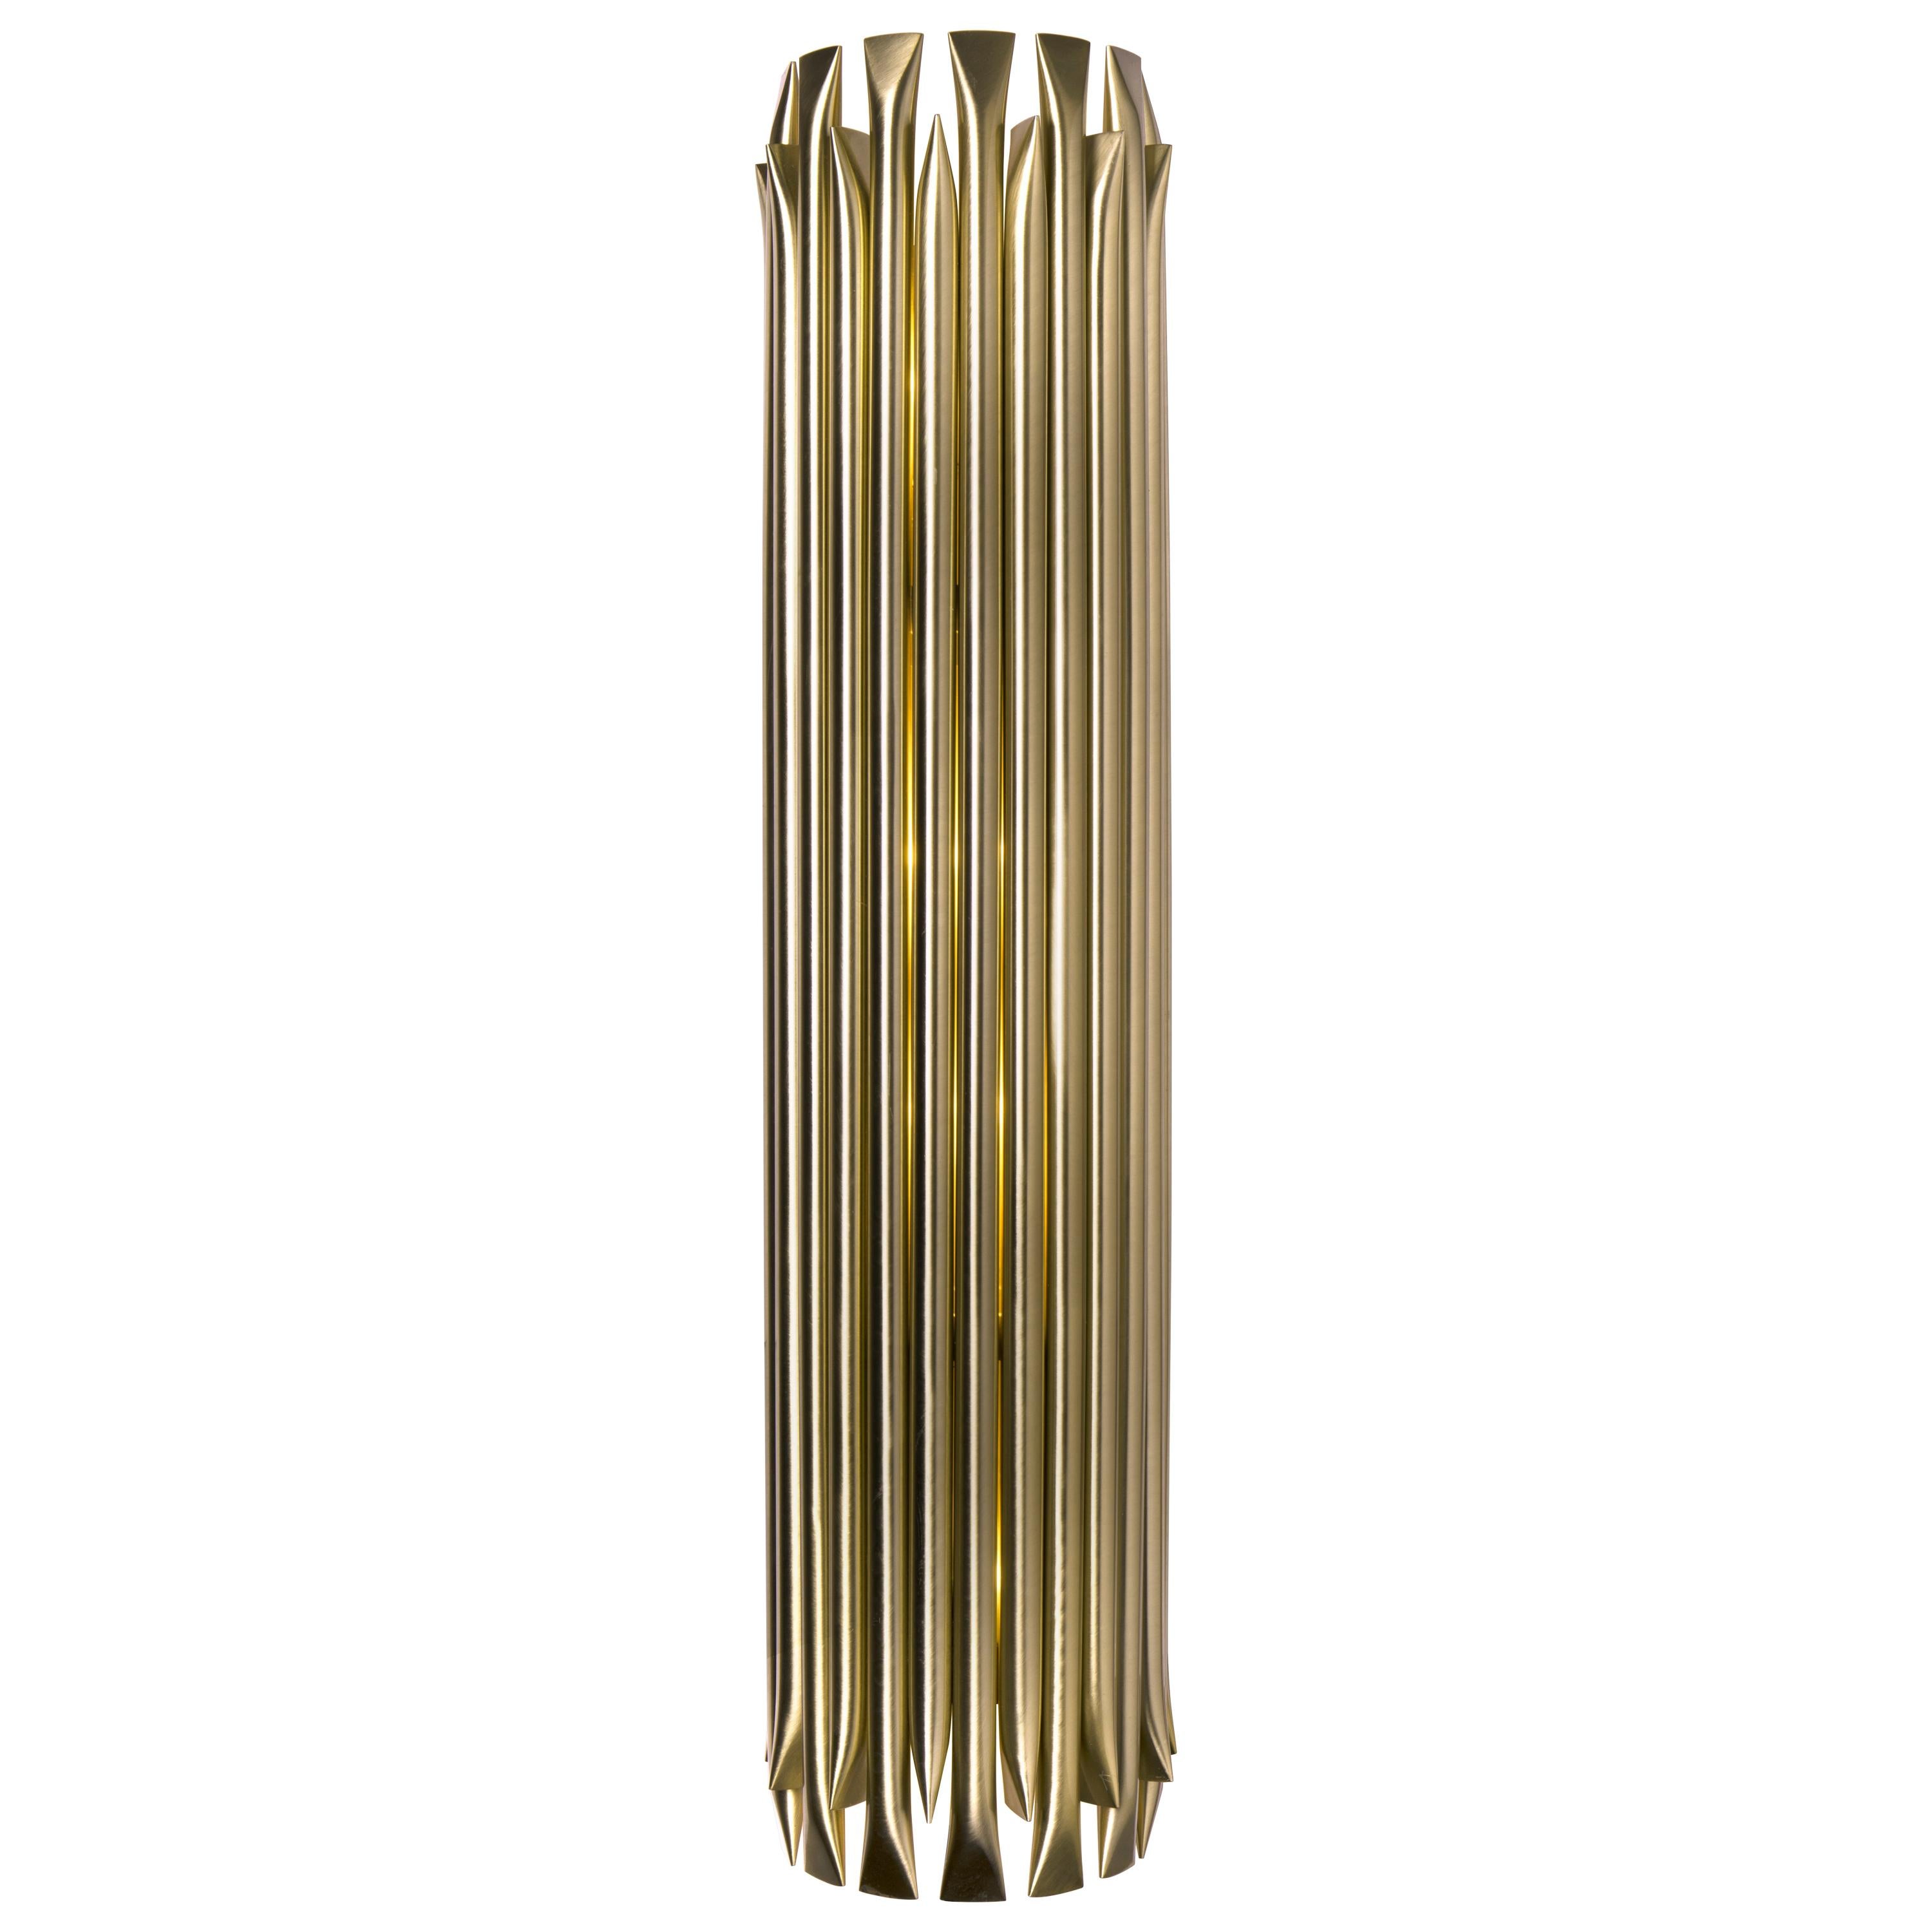 Matheny Large Wall Light in Brass with Brushed Nickel Finish For Sale